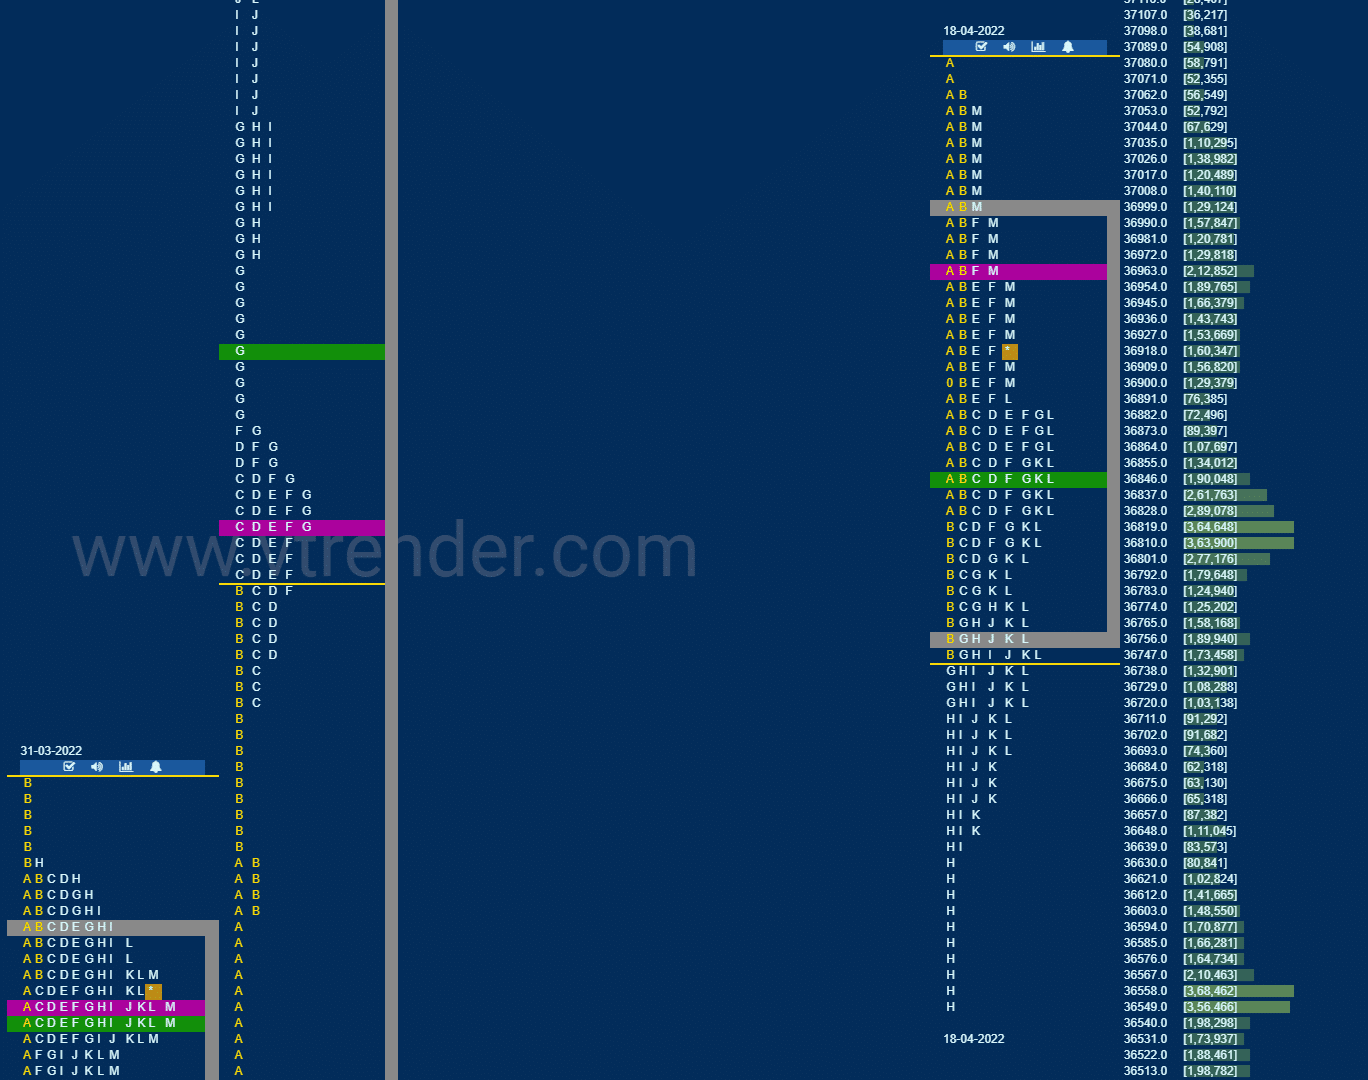 Bnf 9 Market Profile Analysis Dated 18Th April 2022 Banknifty Futures, Charts, Day Trading, Intraday Trading, Intraday Trading Strategies, Market Profile, Market Profile Trading Strategies, Nifty Futures, Order Flow Analysis, Support And Resistance, Technical Analysis, Trading Strategies, Volume Profile Trading